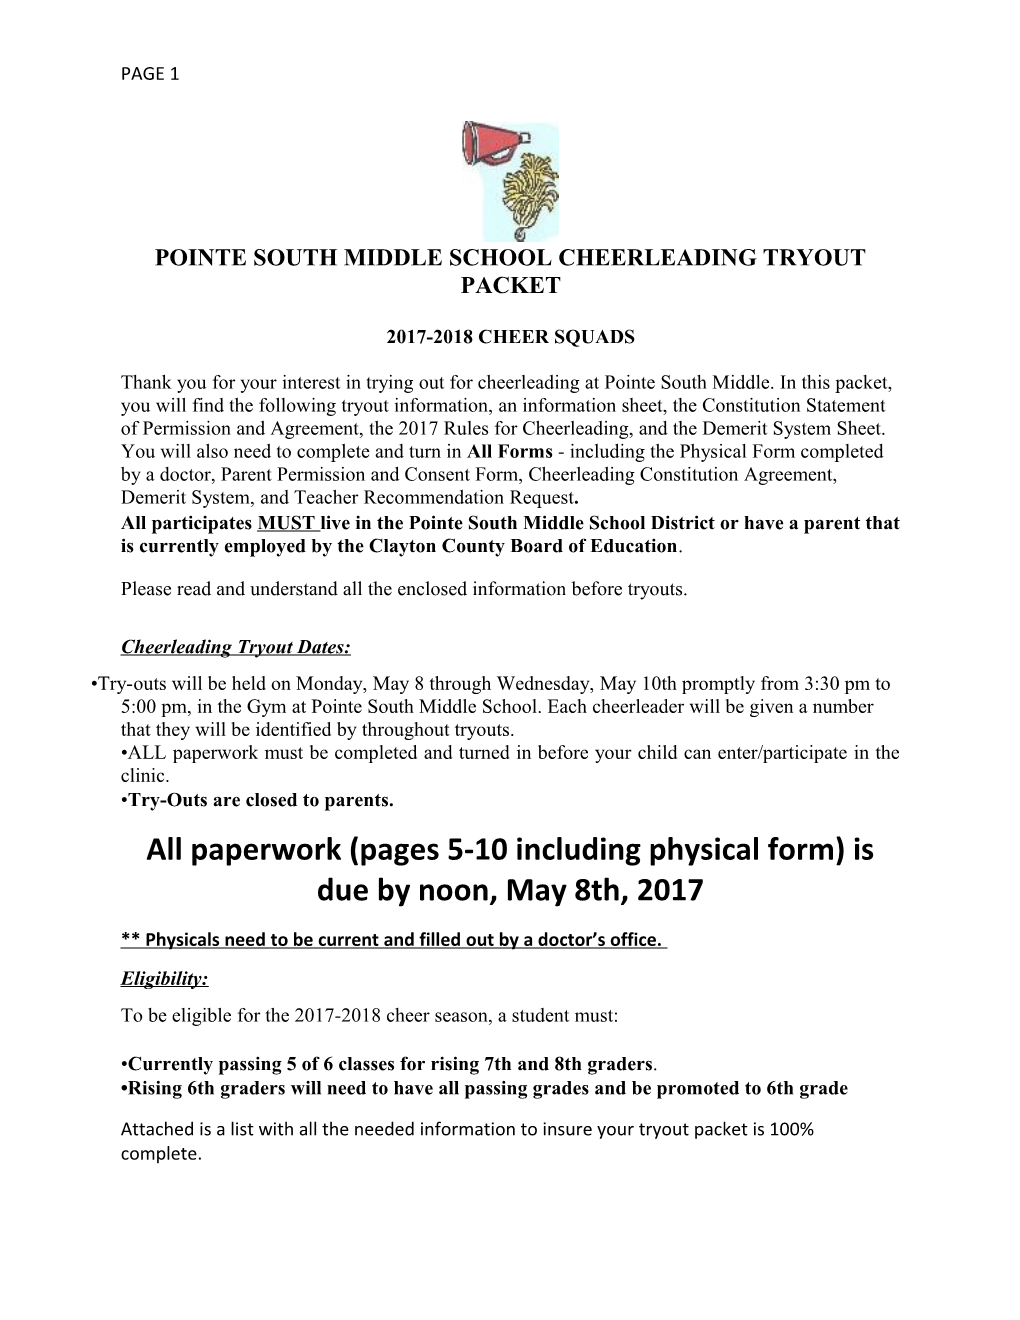 Pointe South Middle School Cheerleading Tryout Packet